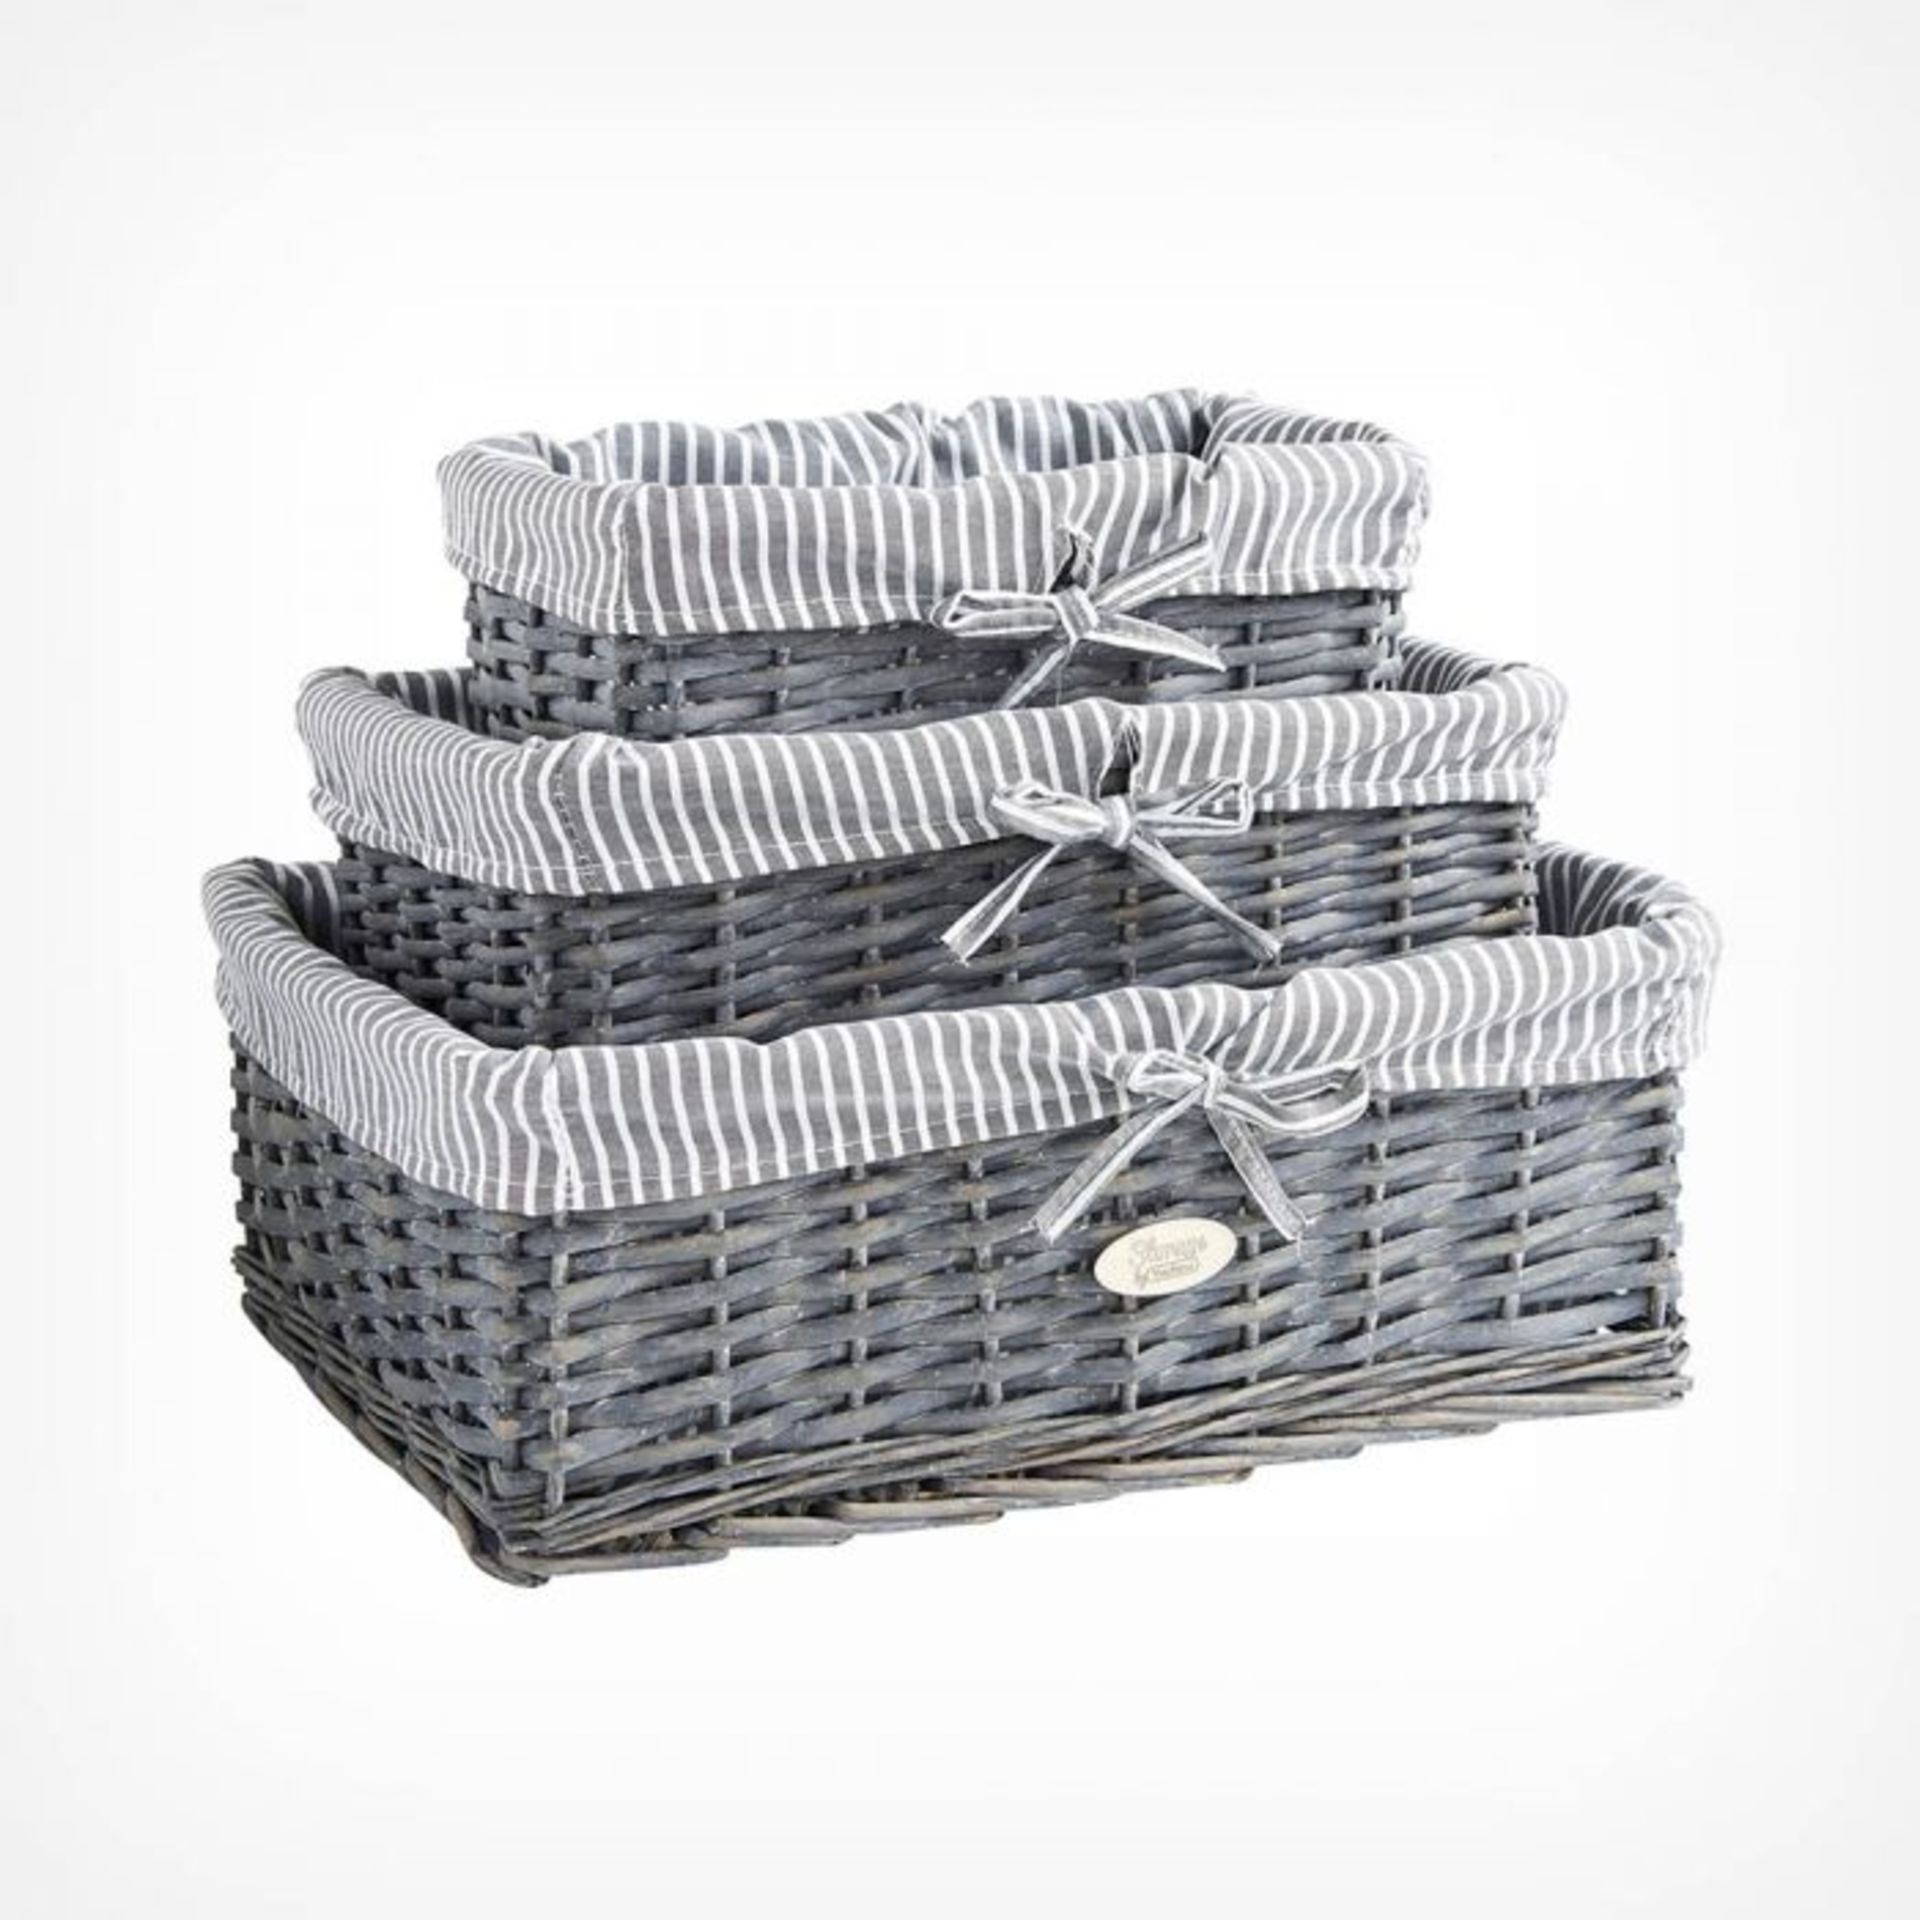 (NN29) Wicker Basket Set of 3 Set of 3 multi-purpose wicker baskets - great for the home or of... - Image 2 of 4